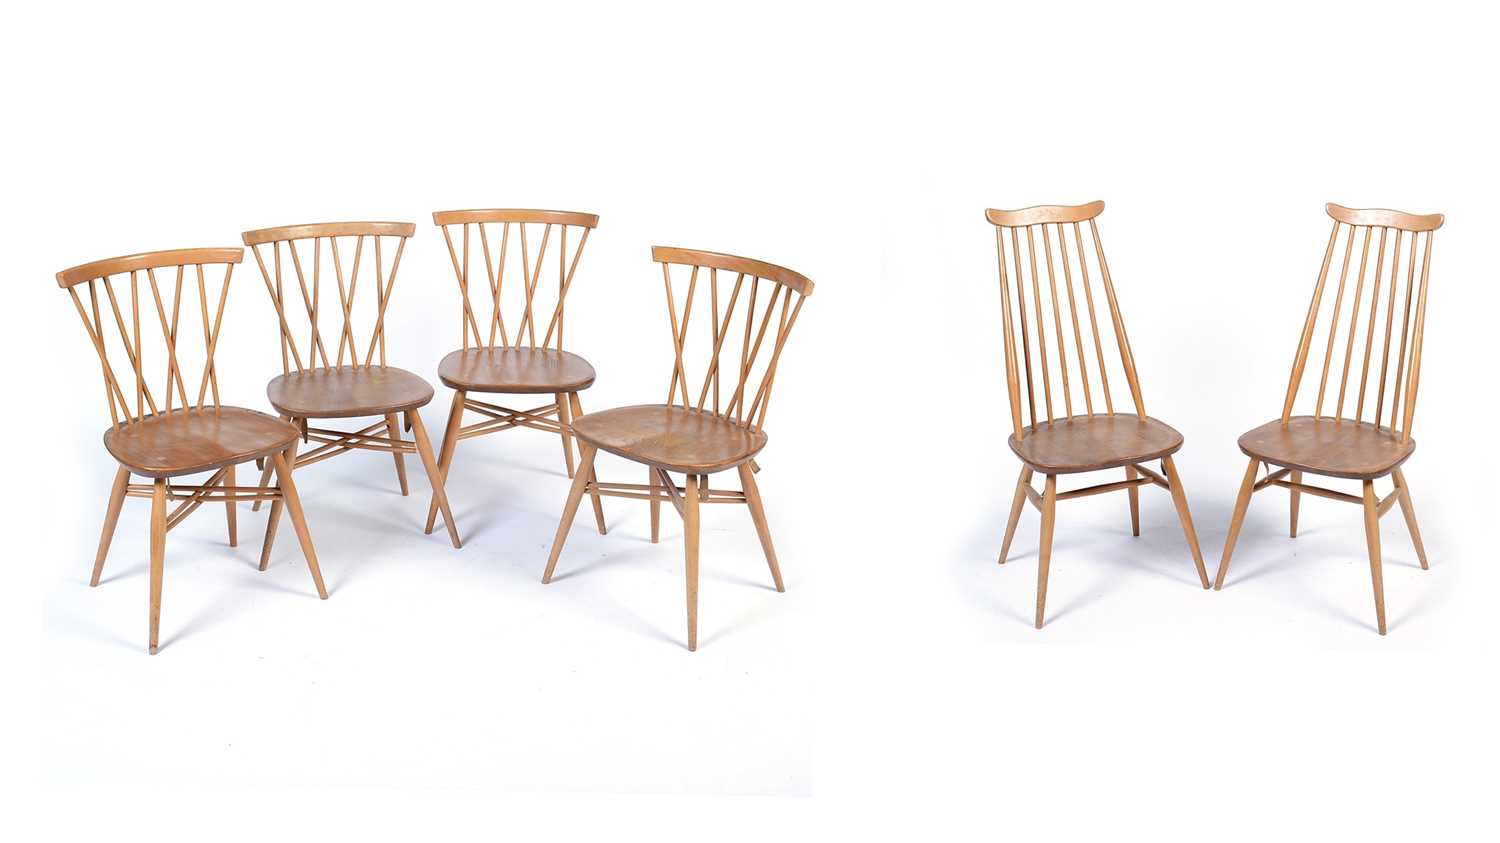 Ercol: four No. 376 Windsor latticed chairs; and two No. 369 Goldsmith Windsor chairs.